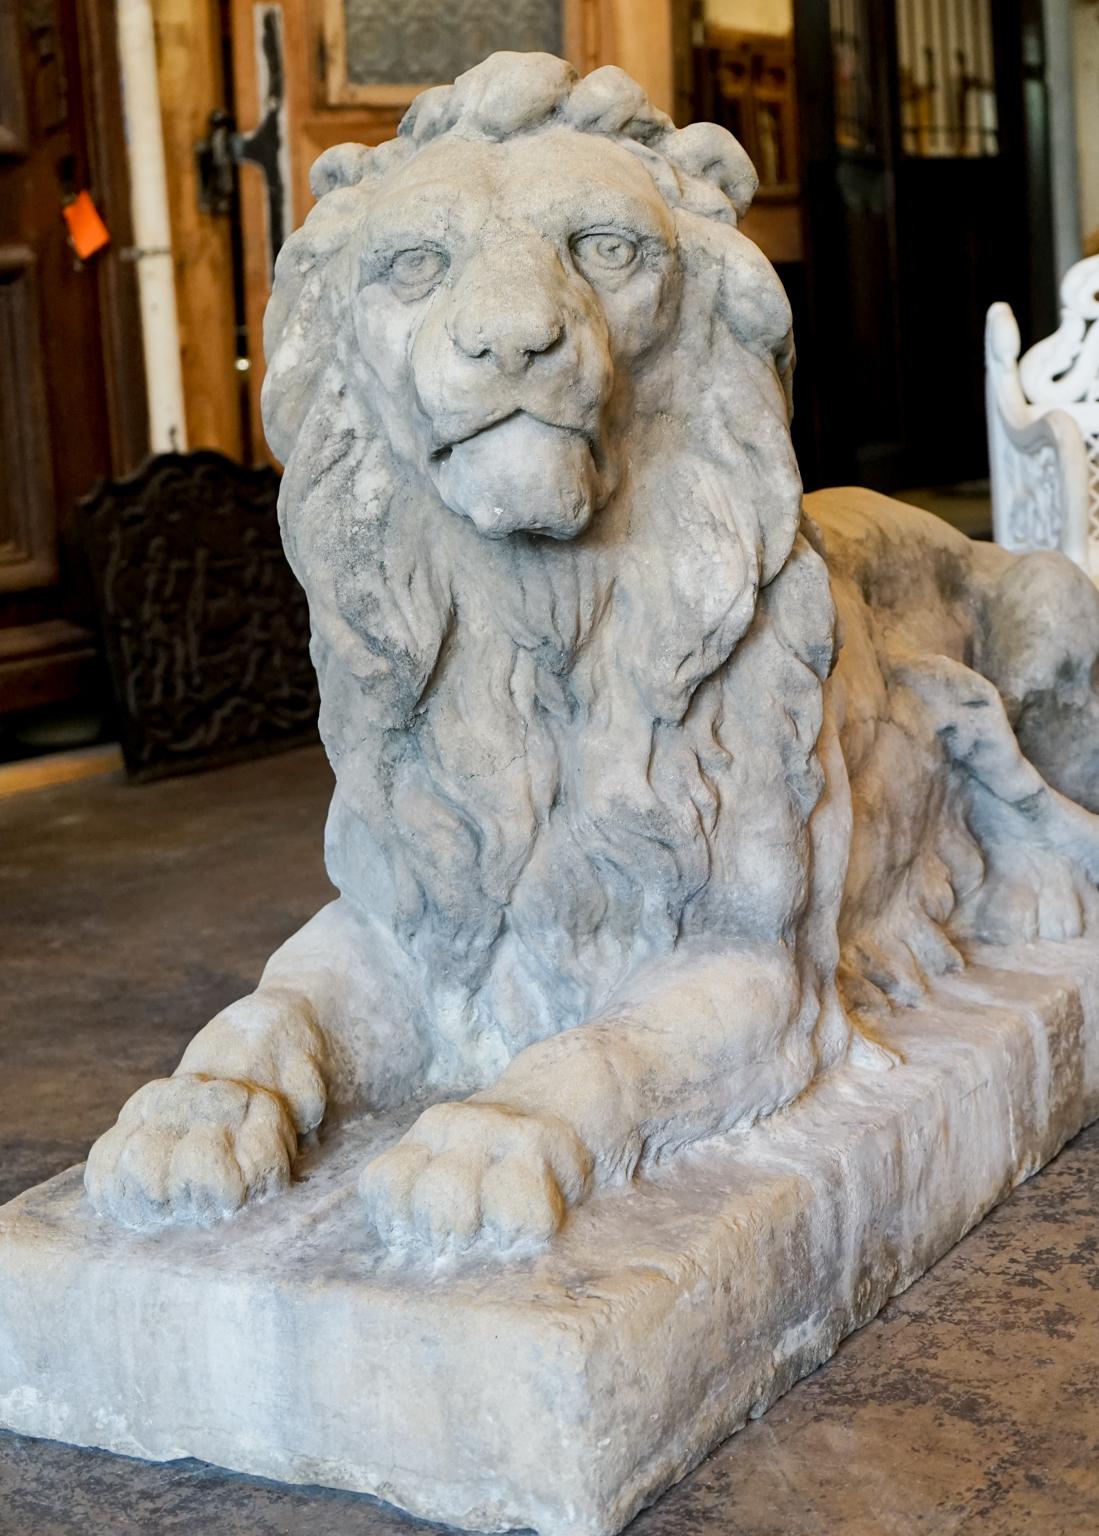 This pair of 18th century Italian lions have incredible detail's and likeness to their subject. Details are exquisitely rendered throughout these pieces, from the lion's mane to its paws. This pair would work exceptionally well in a garden setting,